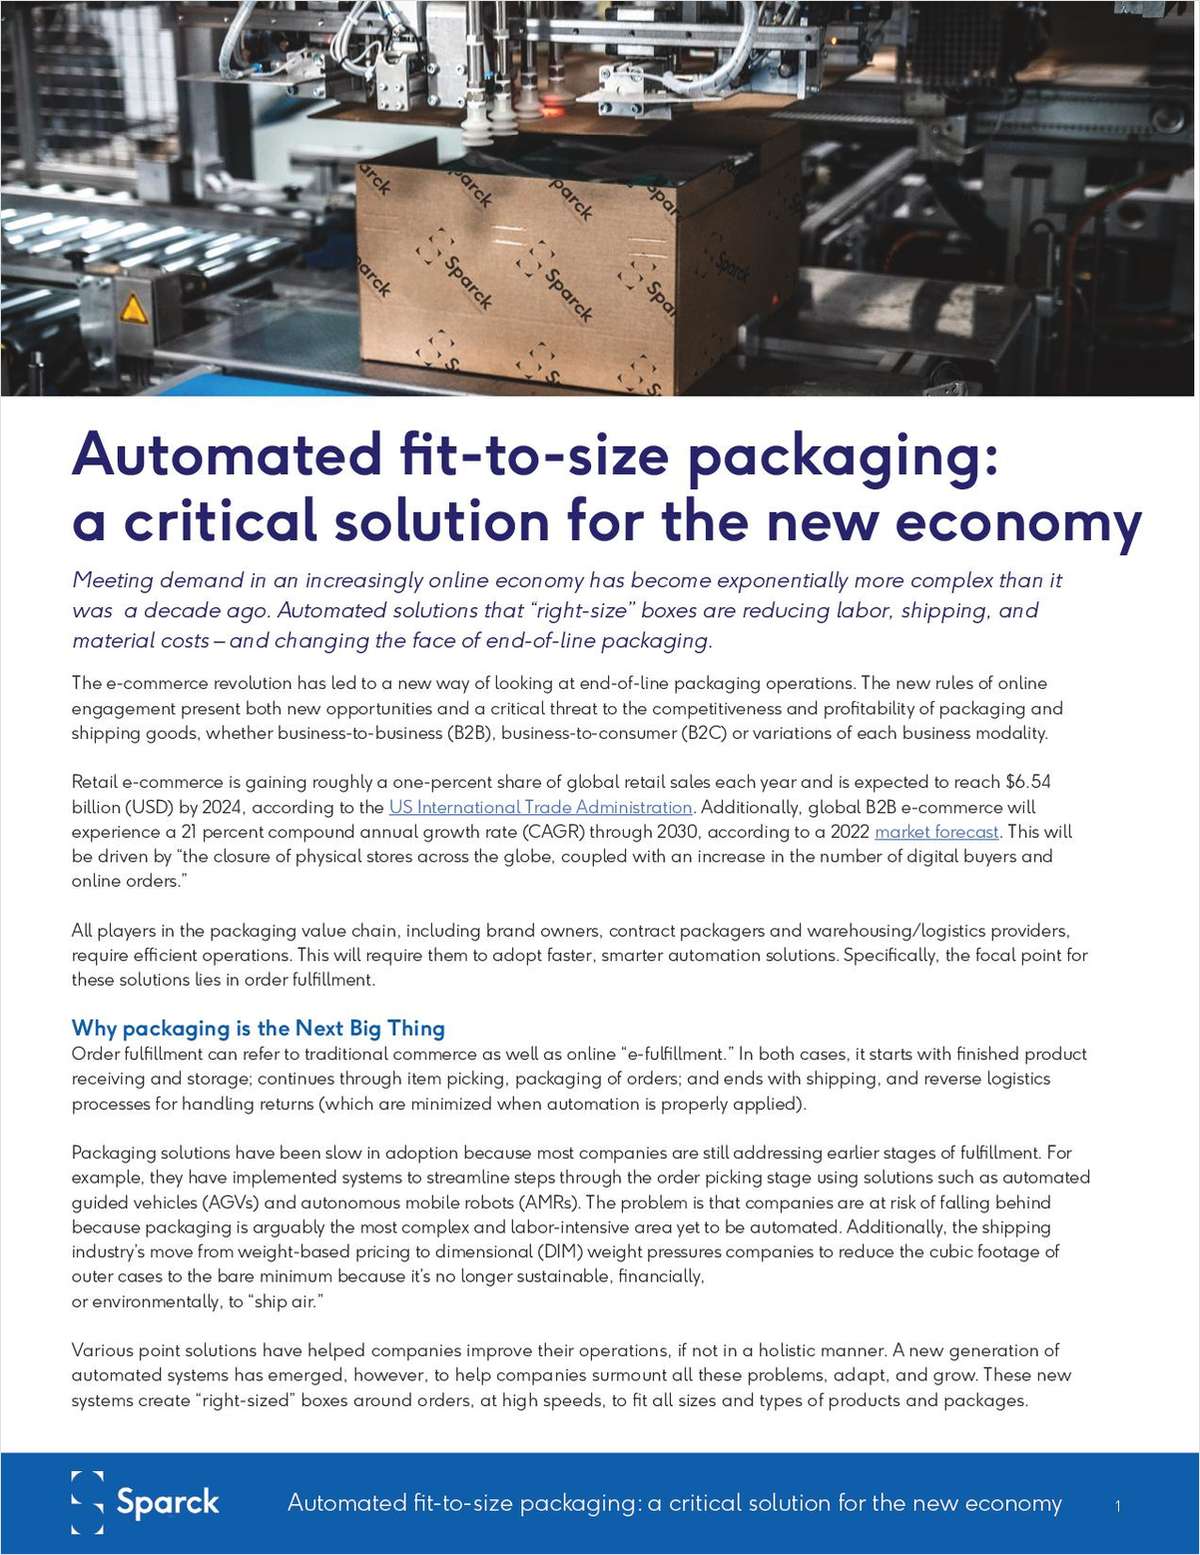 Automated Fit-to-Size Packaging: A Critical Solution for the New Economy